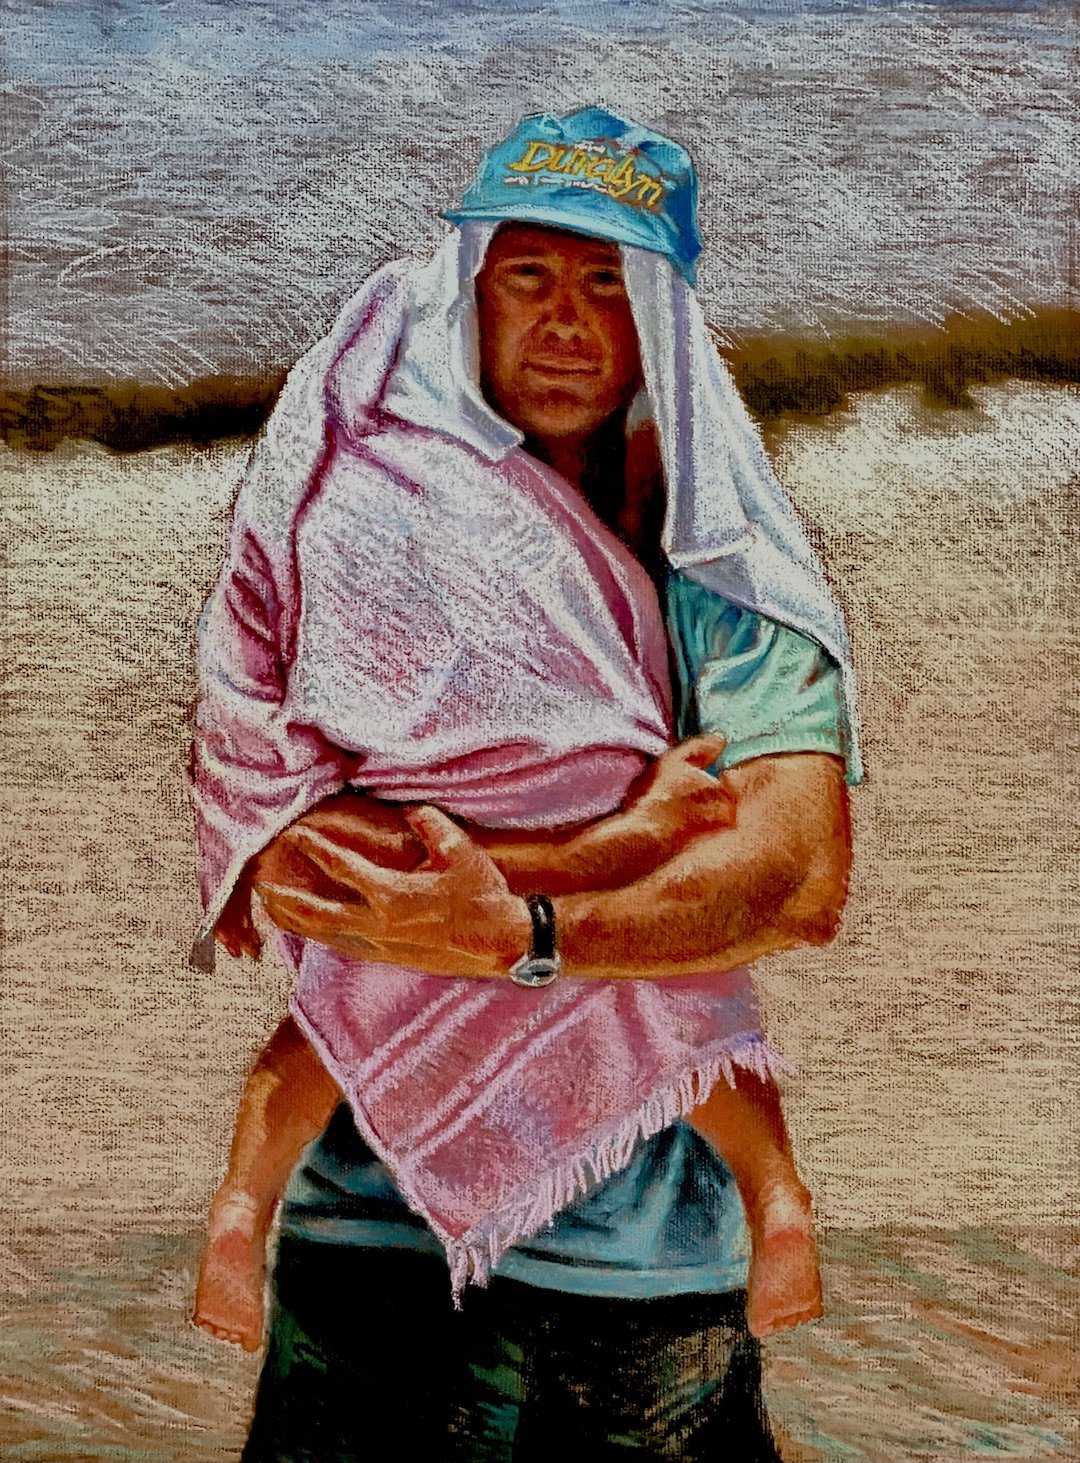    The Man on the Beach  , 30” x 23”, pastel on pastel board 